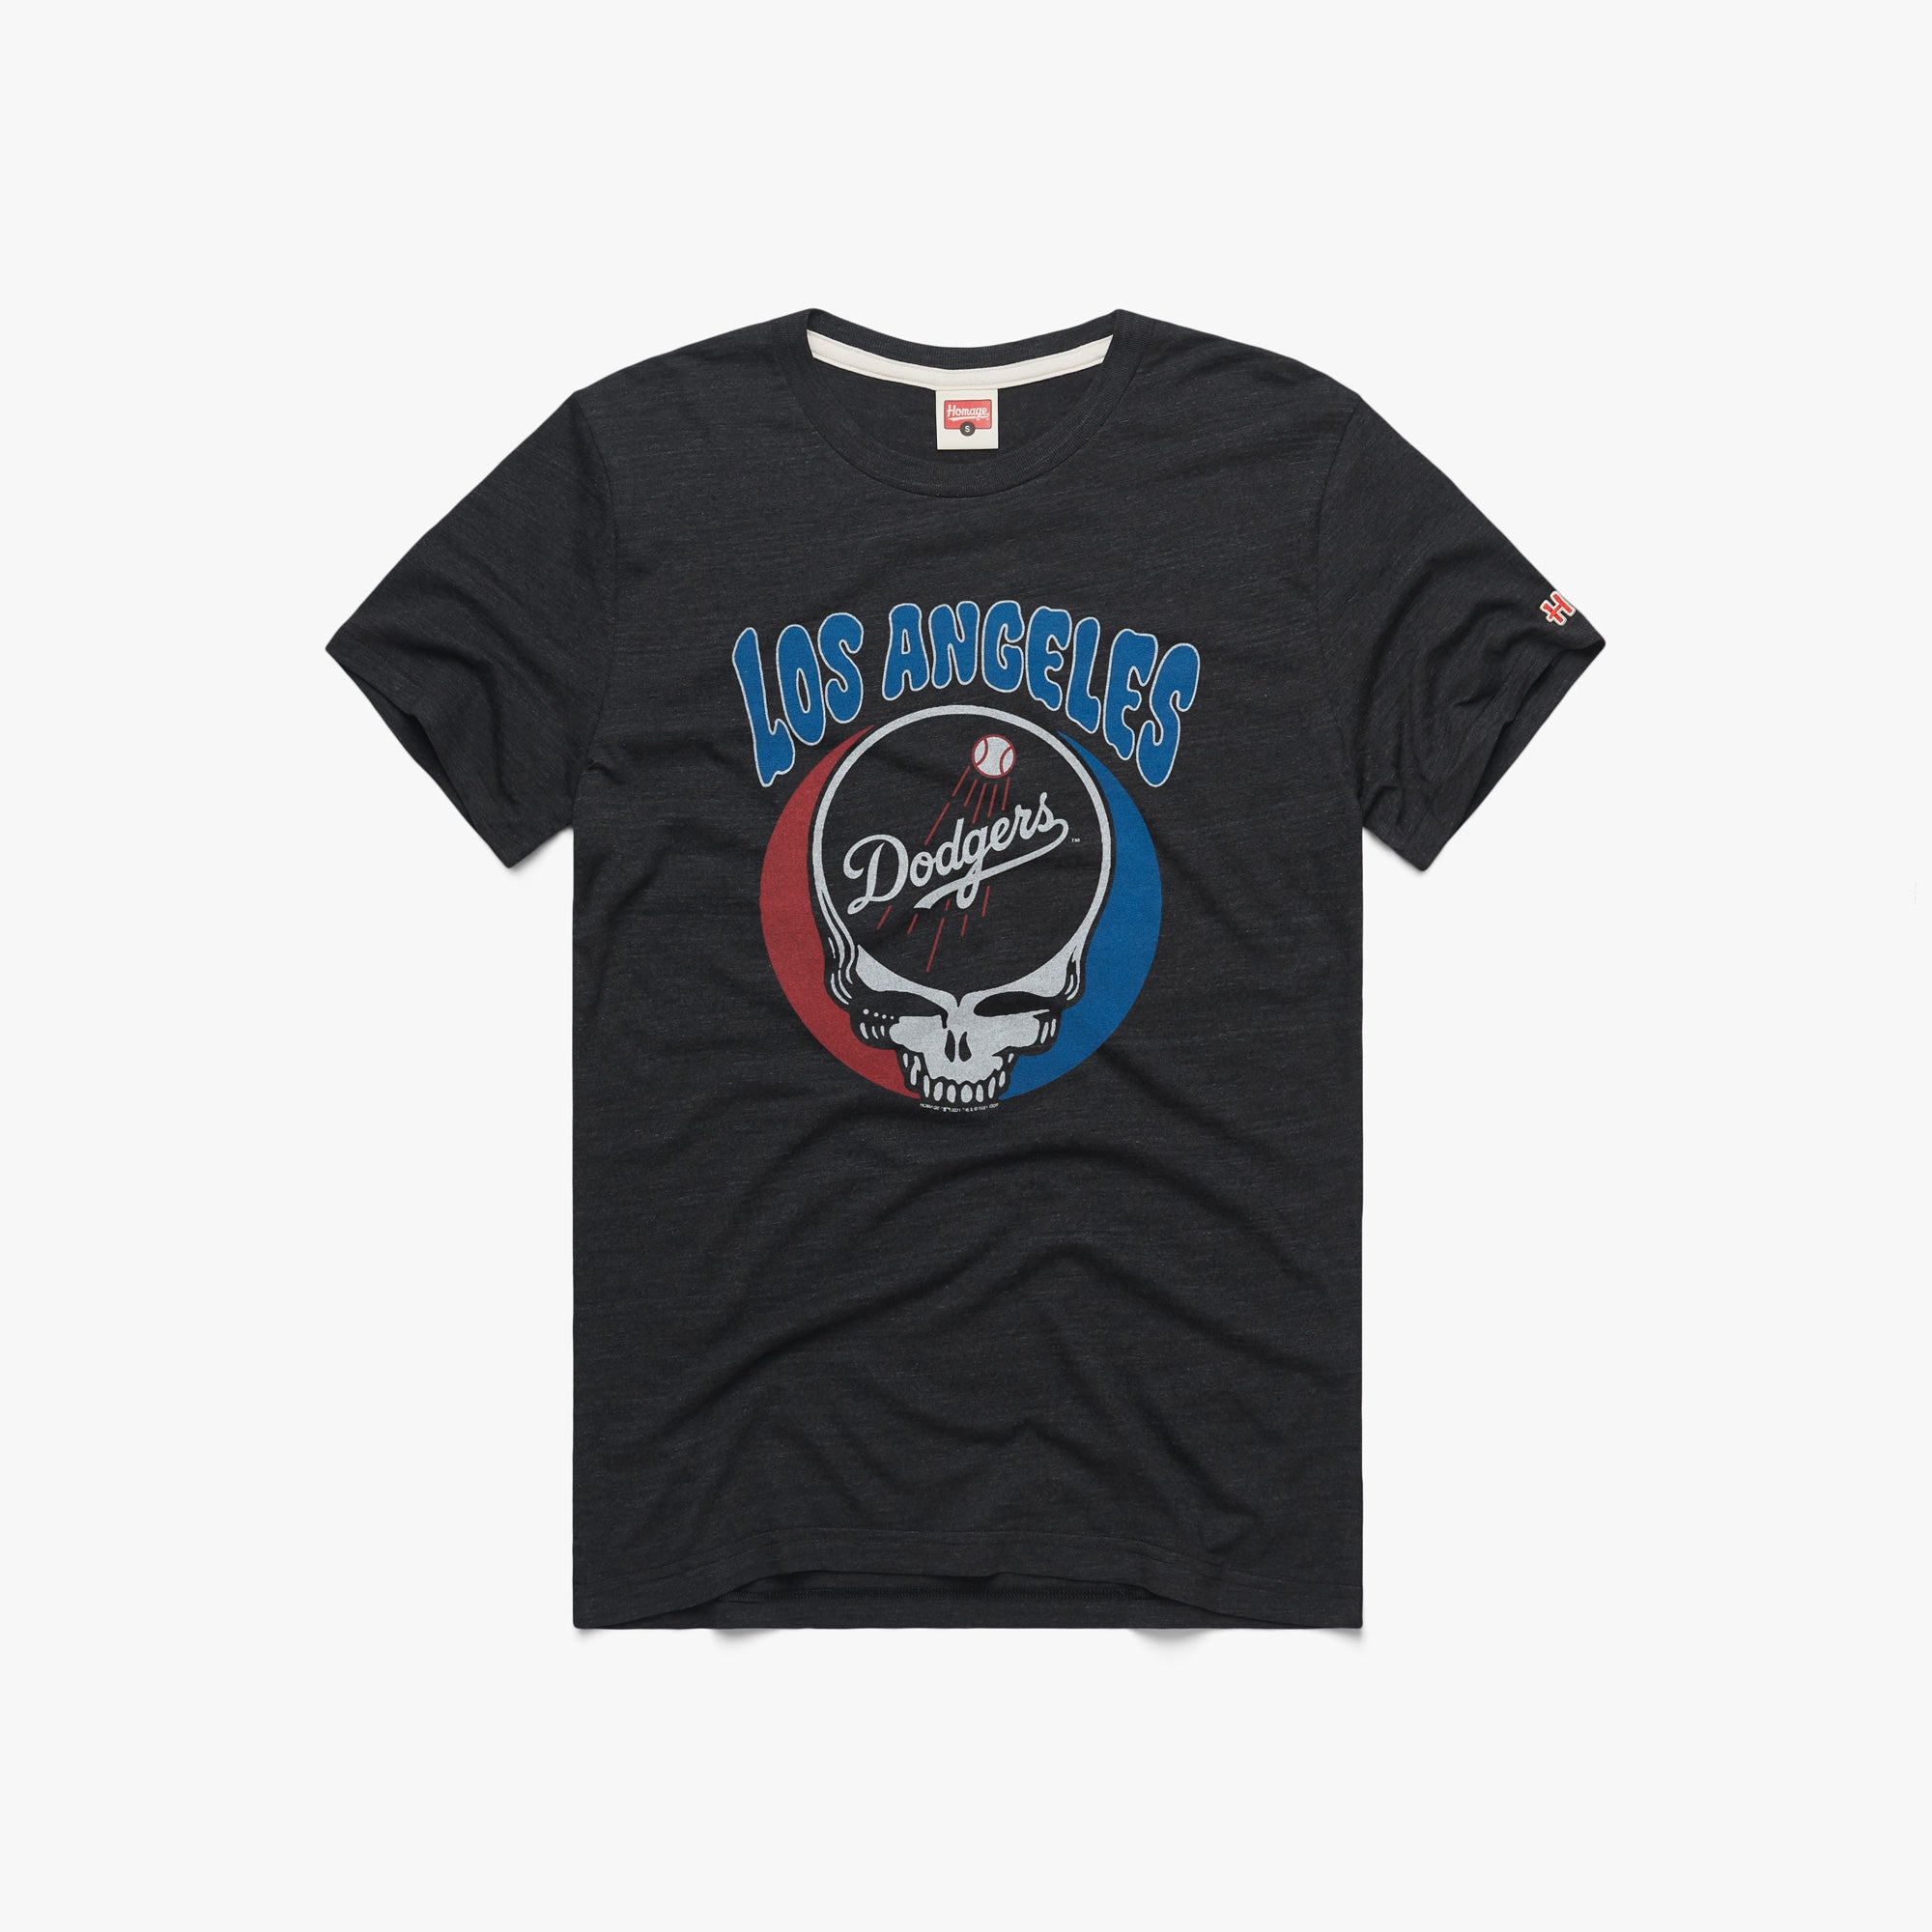 MLB x Grateful Dead x Dodgers T-Shirt from Homage. | Charcoal | Vintage Apparel from Homage.